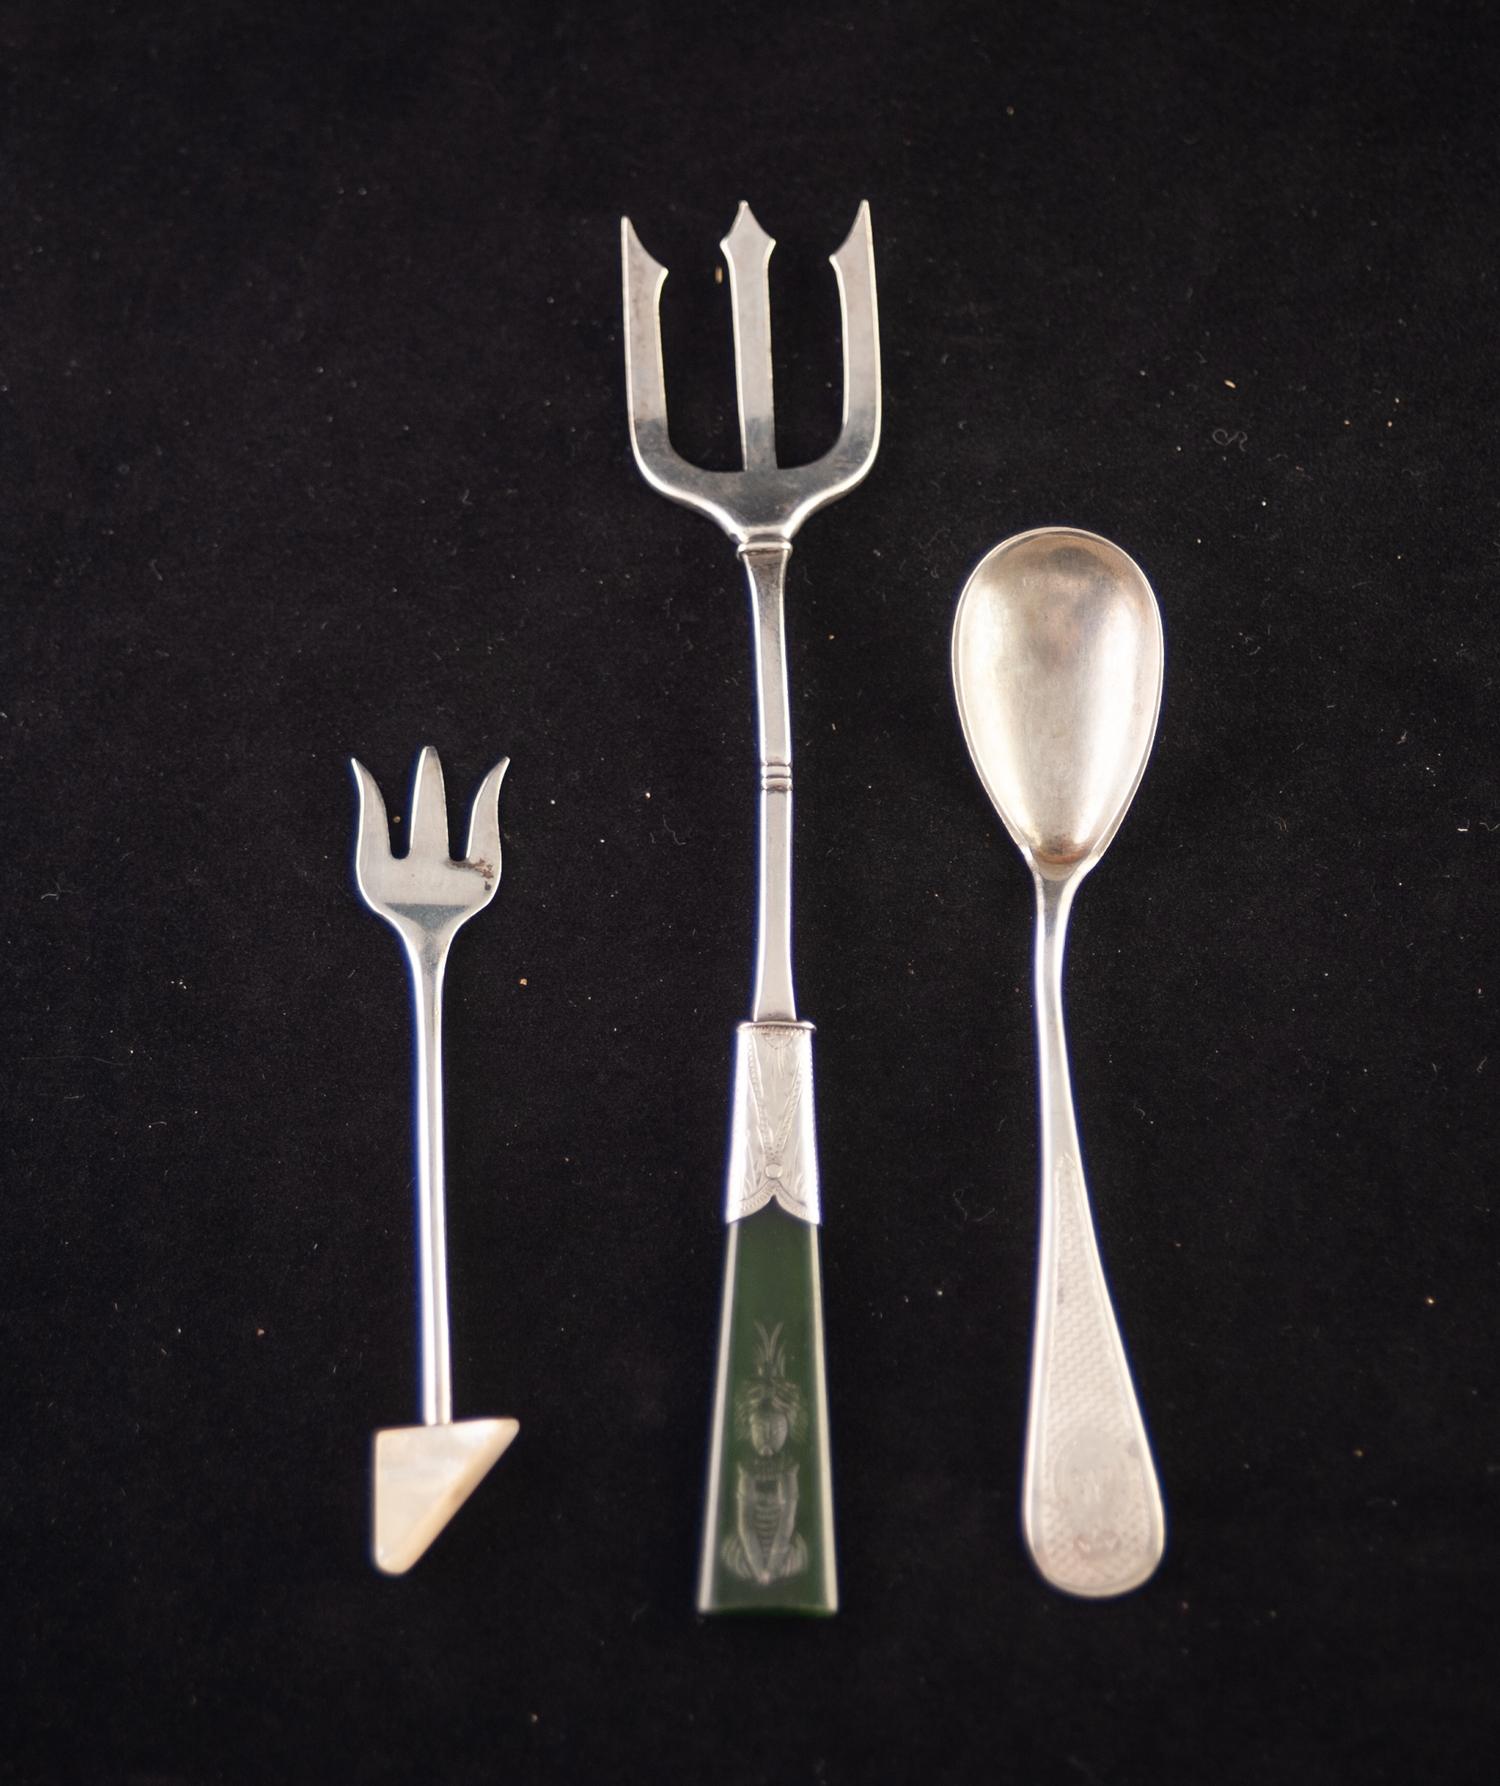 AN EARLY TWENTIETH CENTURY STERLING SILVER PICKLE FORK, with green jade handle, carved in intaglio